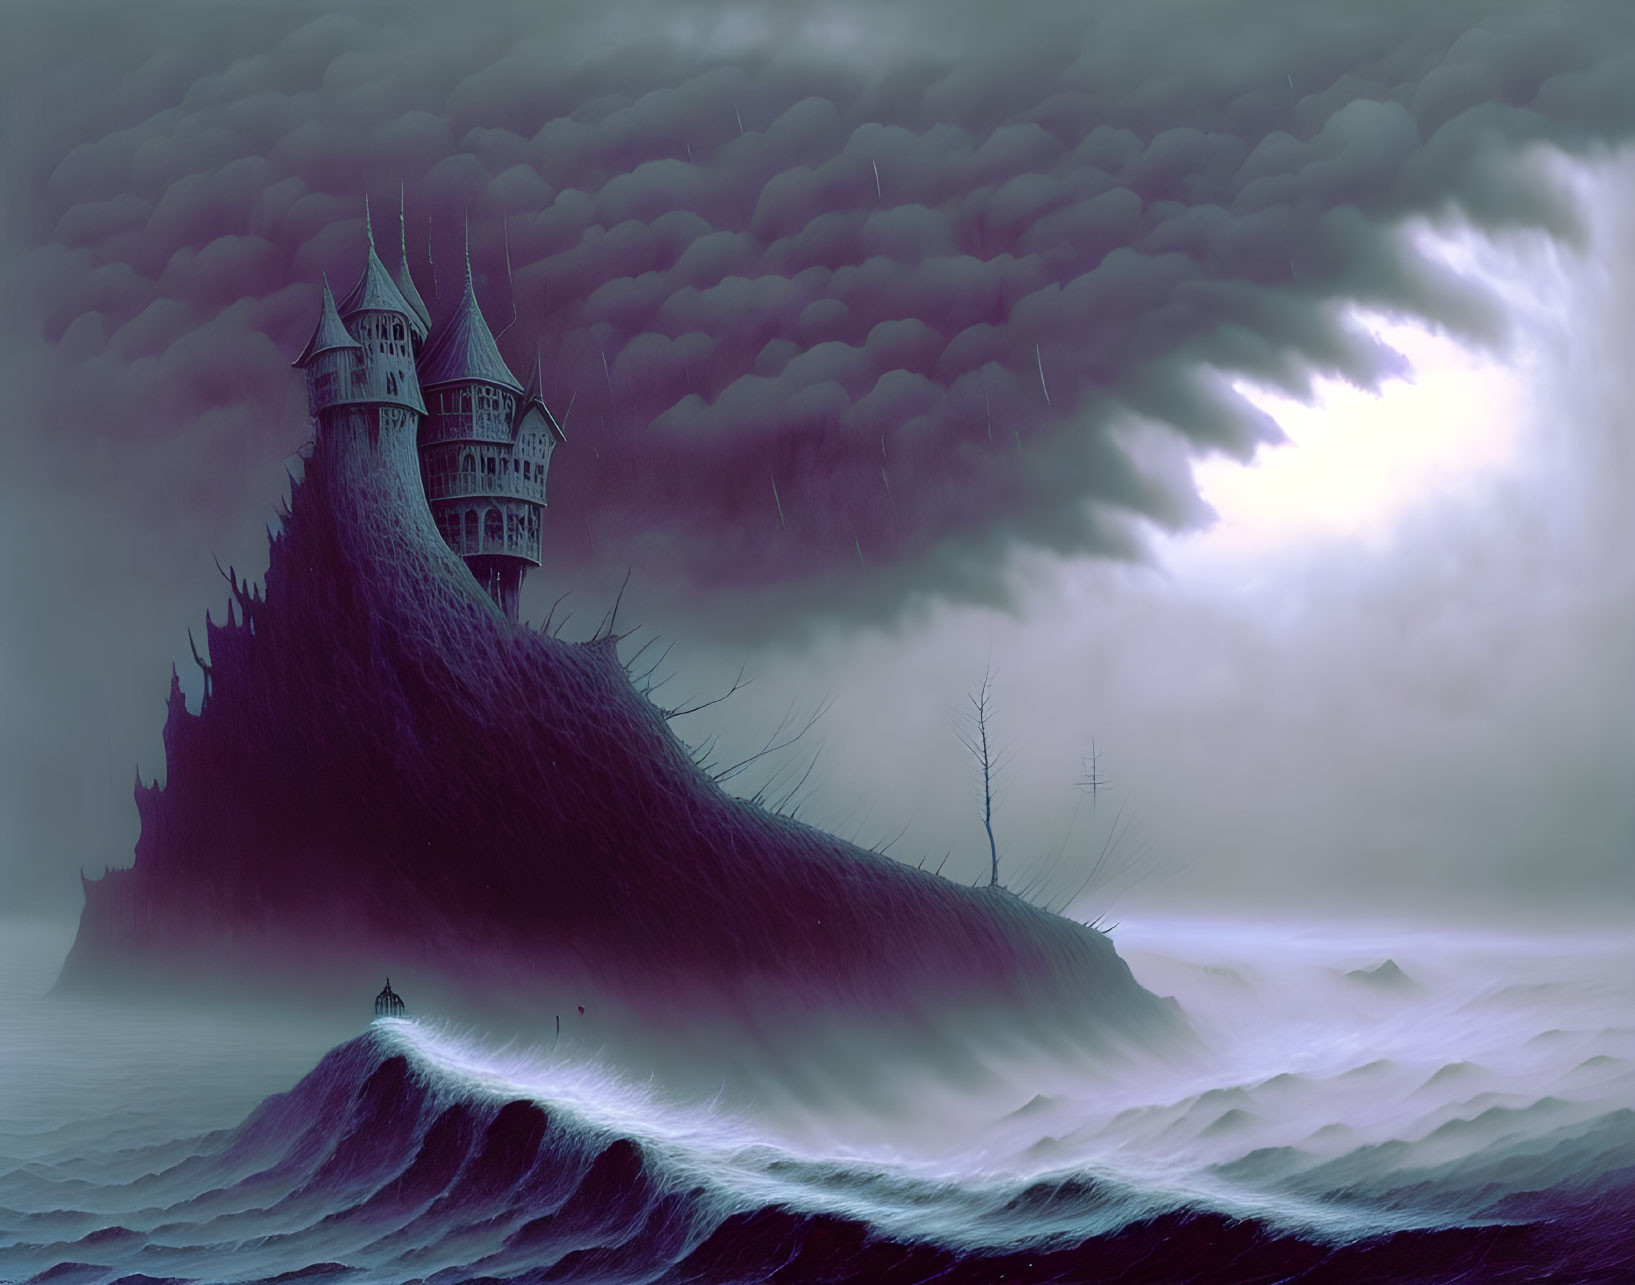 Dark castle on steep hill in fantasy landscape with stormy sky and turbulent waves